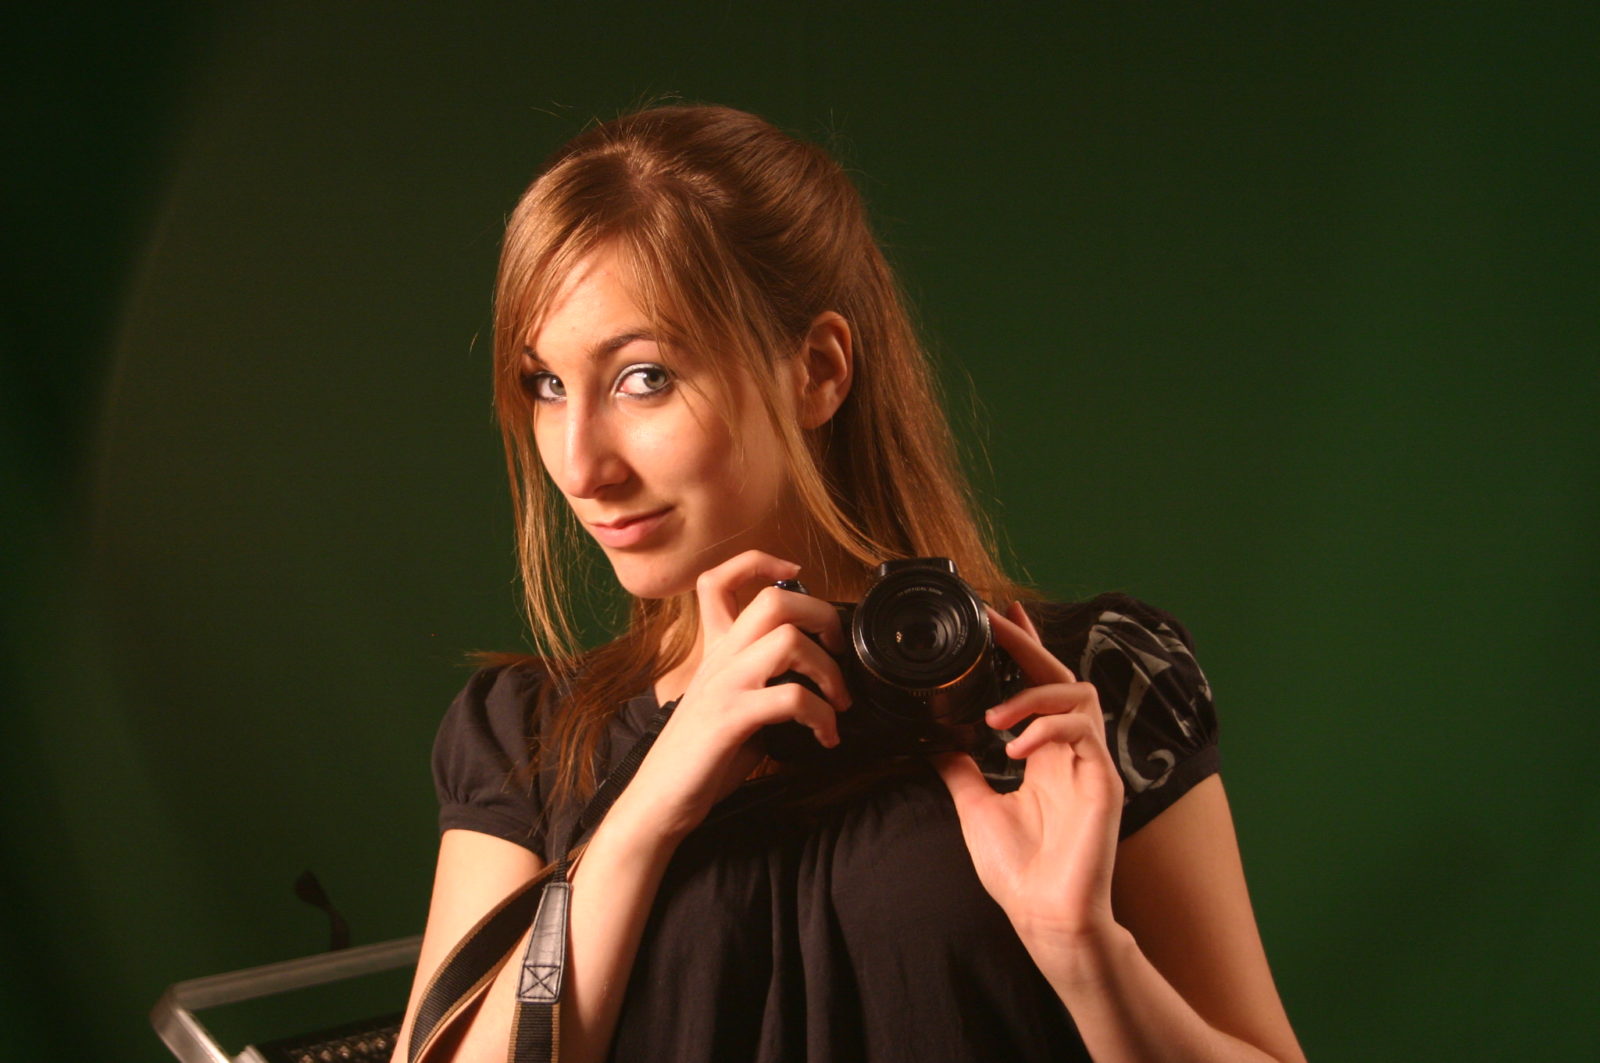 A photo of Deanna holding a camera in front of a green backdrop taken from her time in photography class